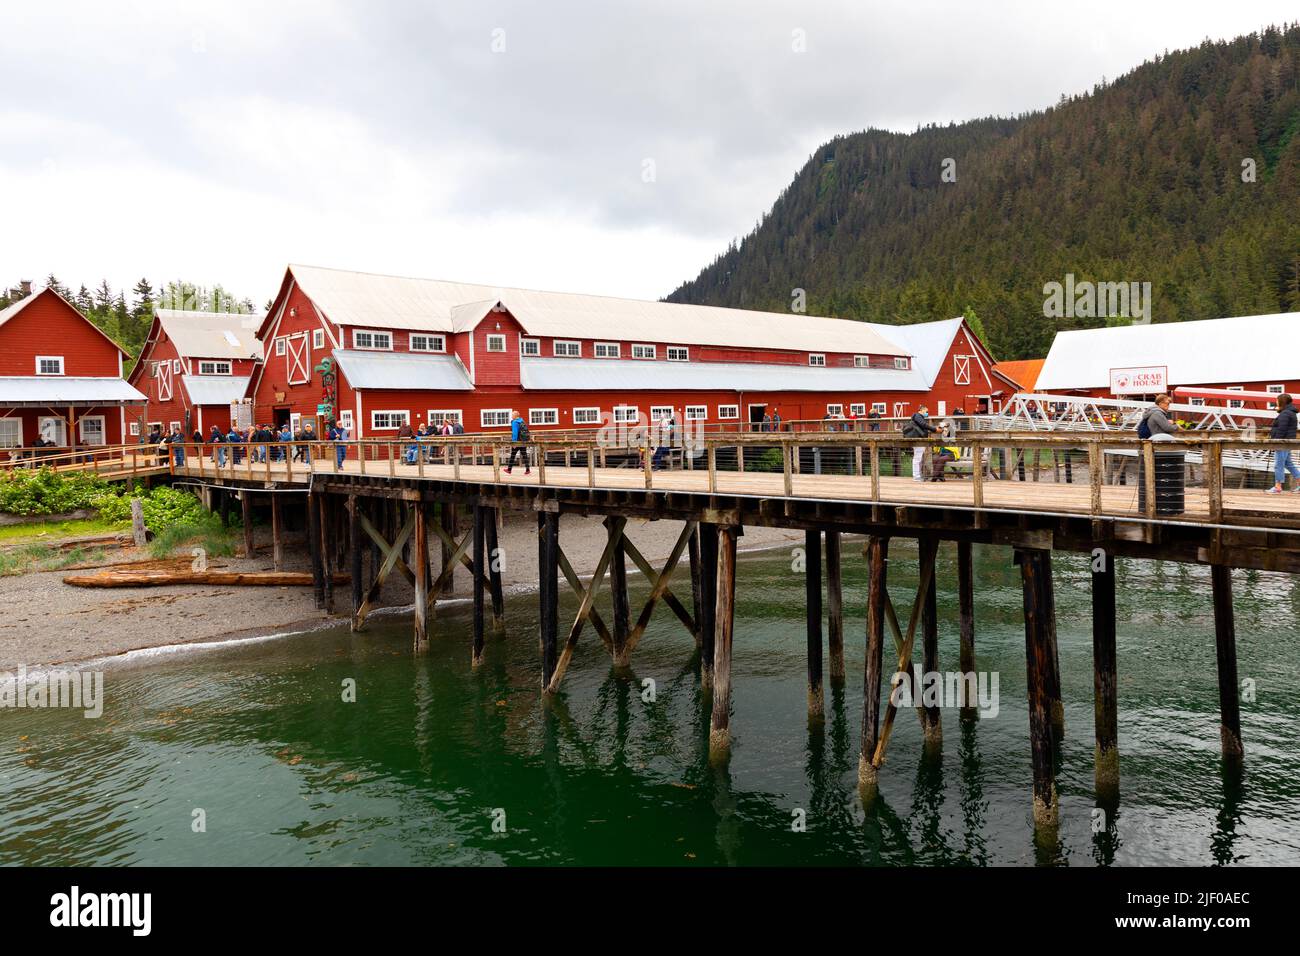 The Cannery on Icy Strait Point Hoonah Alaska United States of America. Stock Photo